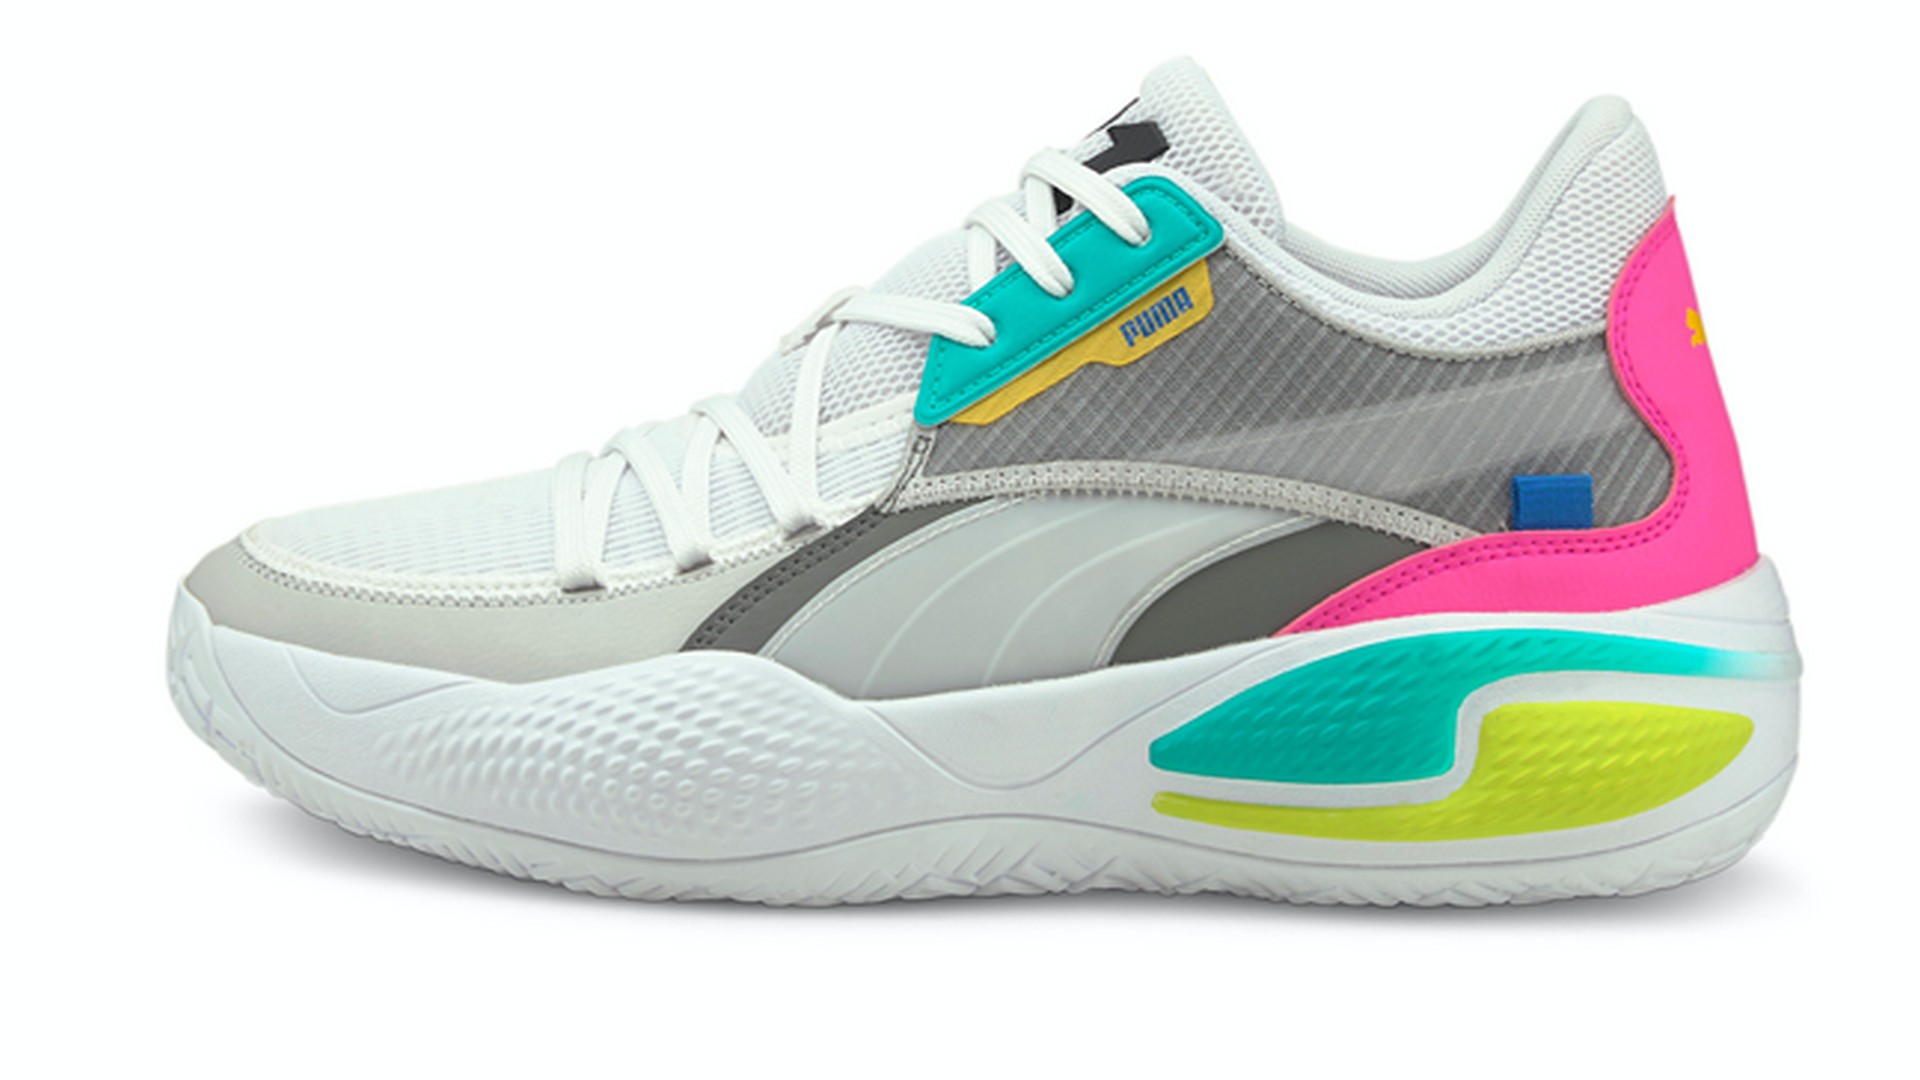 Never Press Pause On Play: Hit The Court In Style With The New PUMA x ...